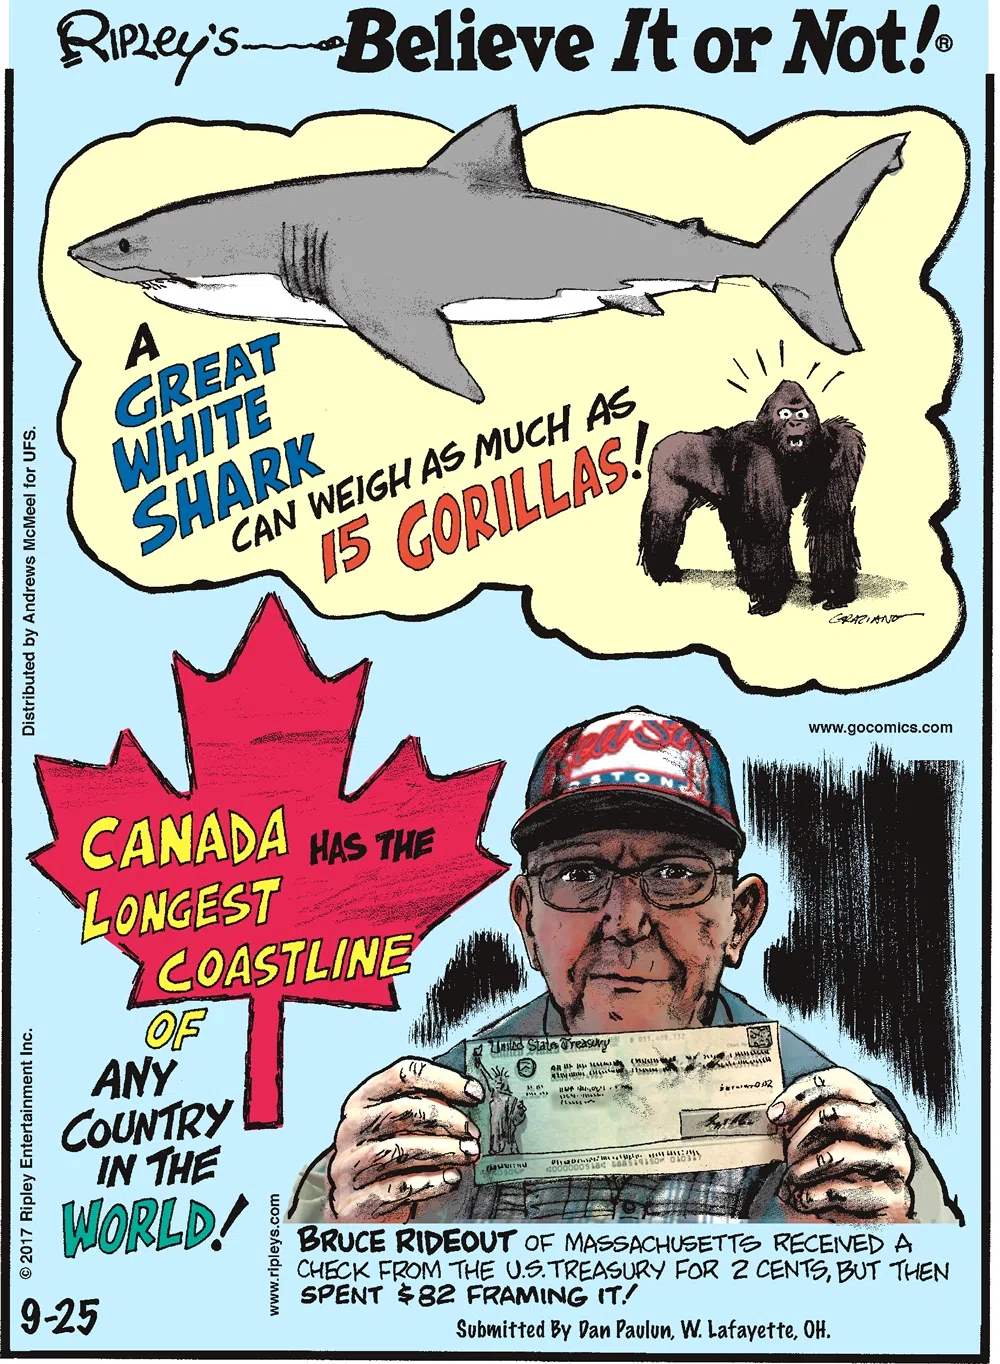 A great white shark can weigh as much as 15 gorillas!-------------------- Canada has the longest coastline of any county in the world!-------------------- Bruce Rideout of Massachusetts received a check from the U.S. Treasure for 2 cents, but then spent $82 framing it! Submitted by Dan Paulun, W. Lafayette, OH.